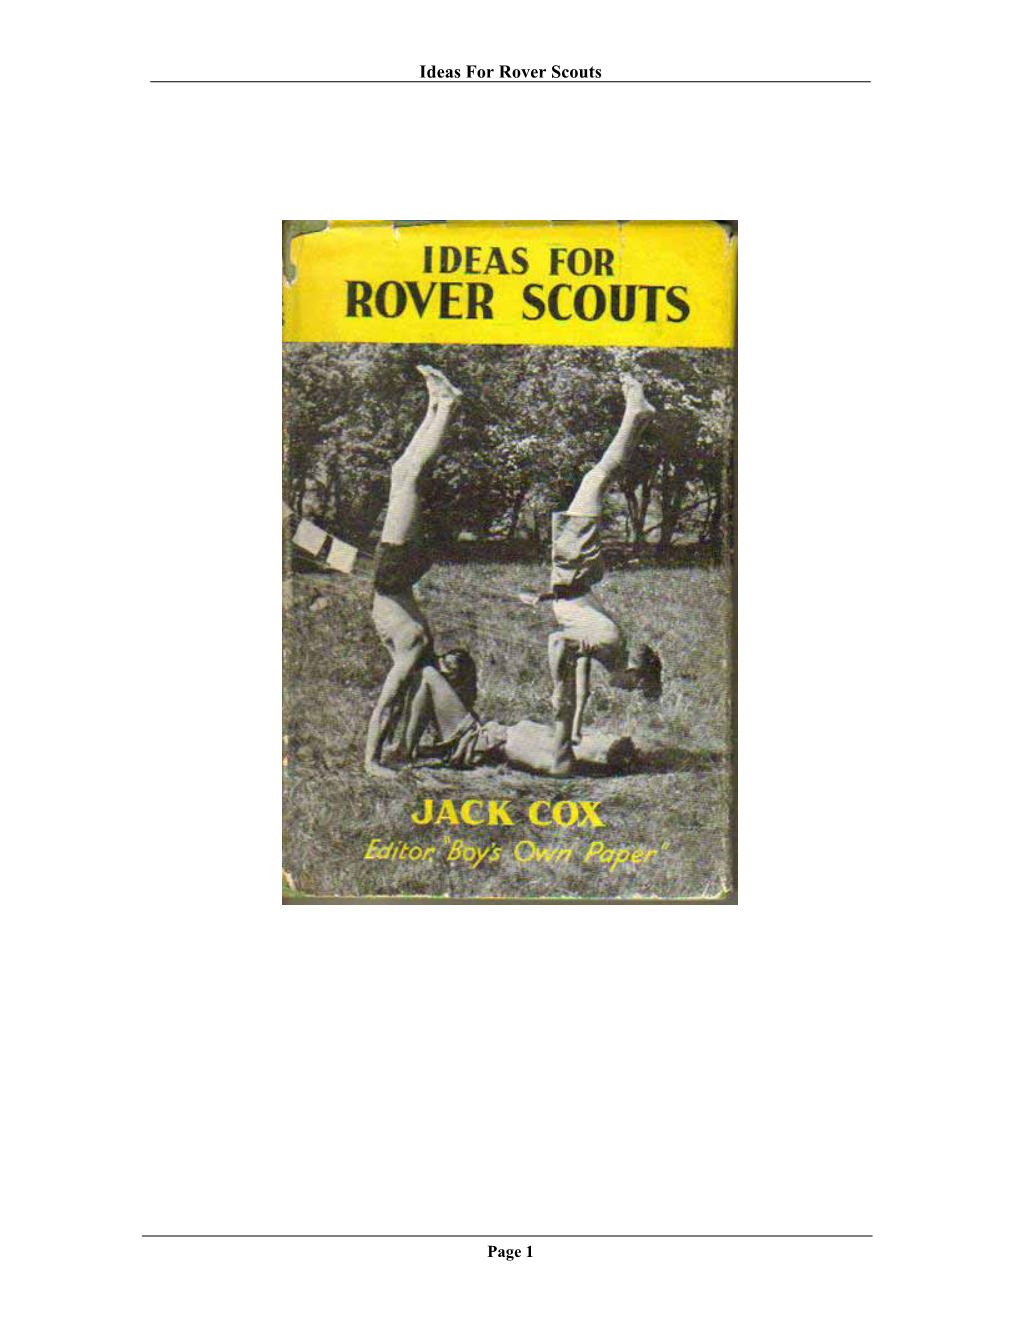 Ideas for Rover Scouts